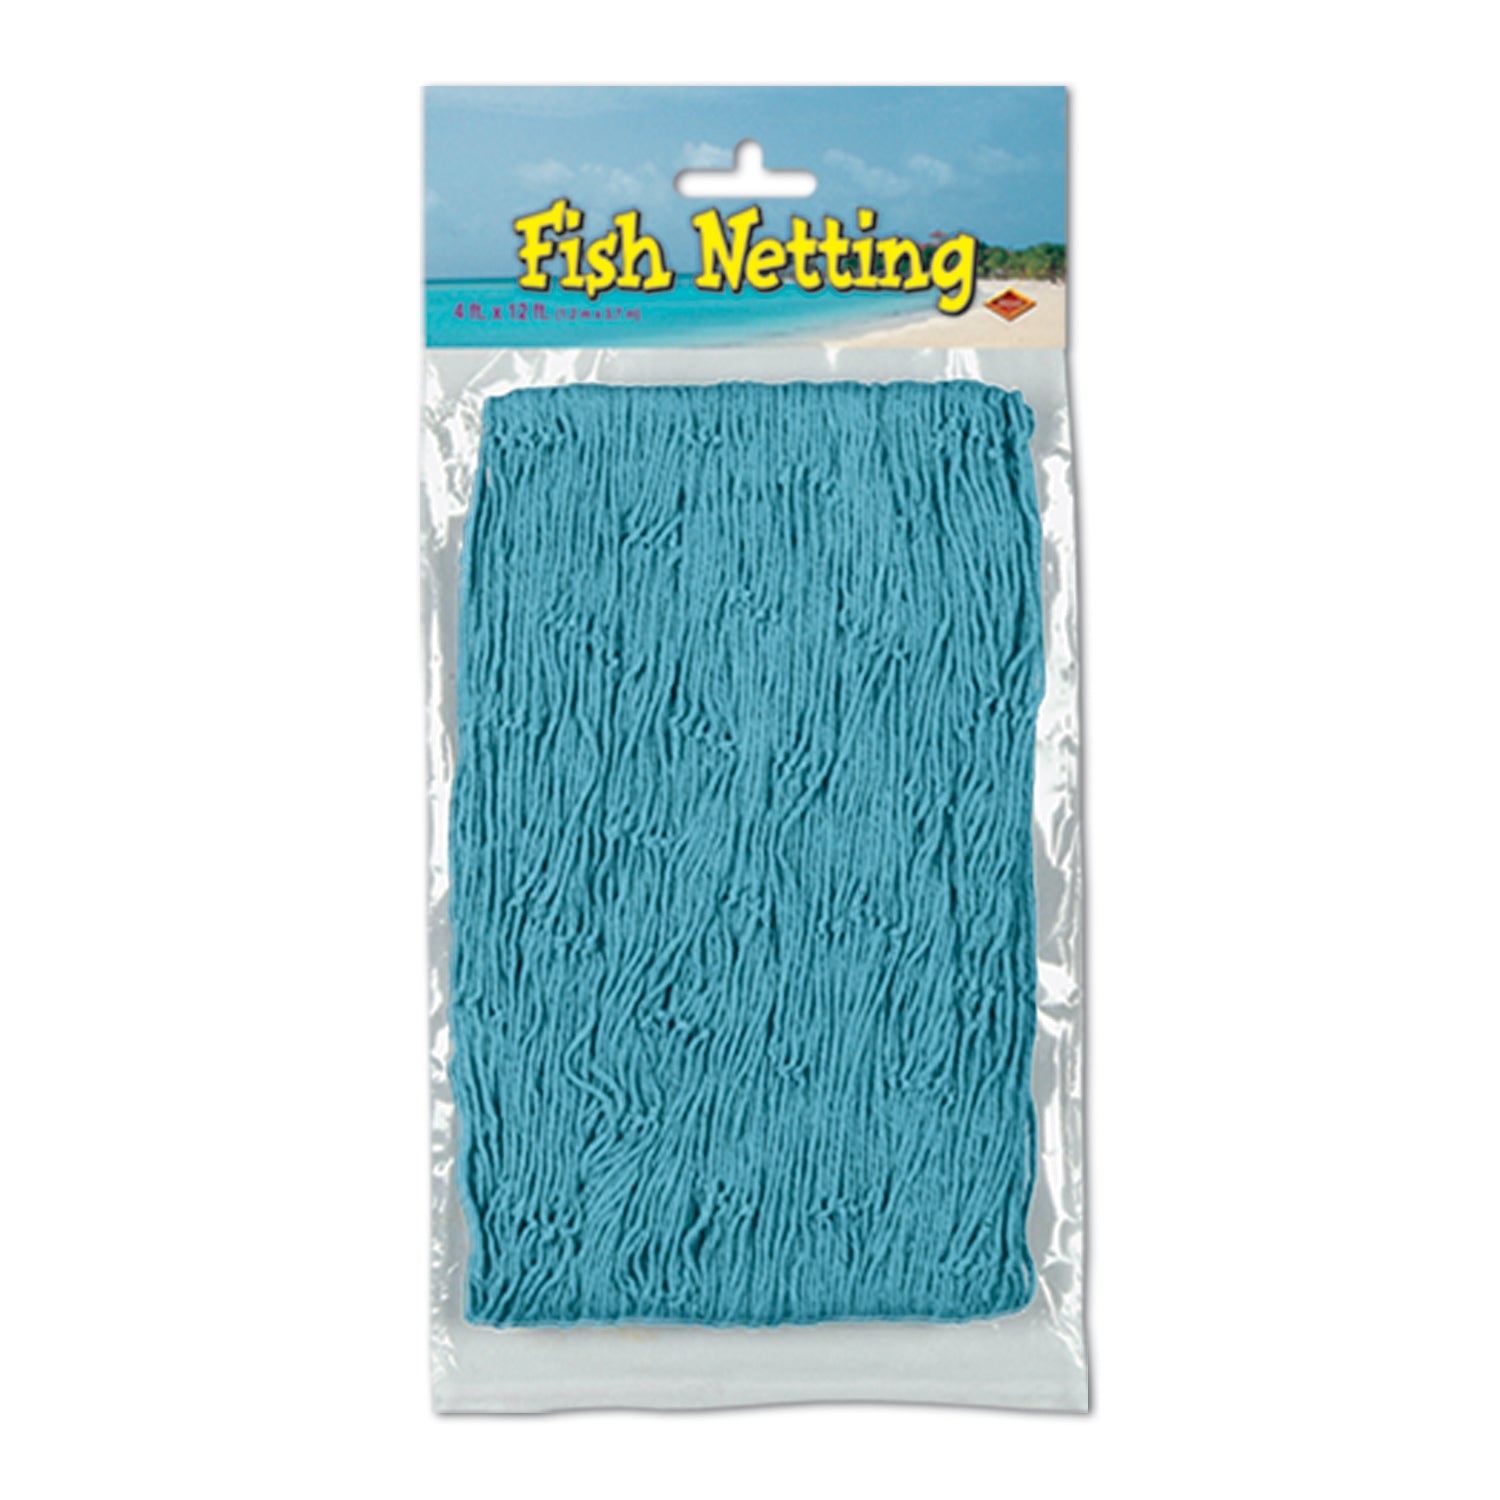 Fish Netting 1.2m x 3.65m Turquoise, Nautical Party Supplies